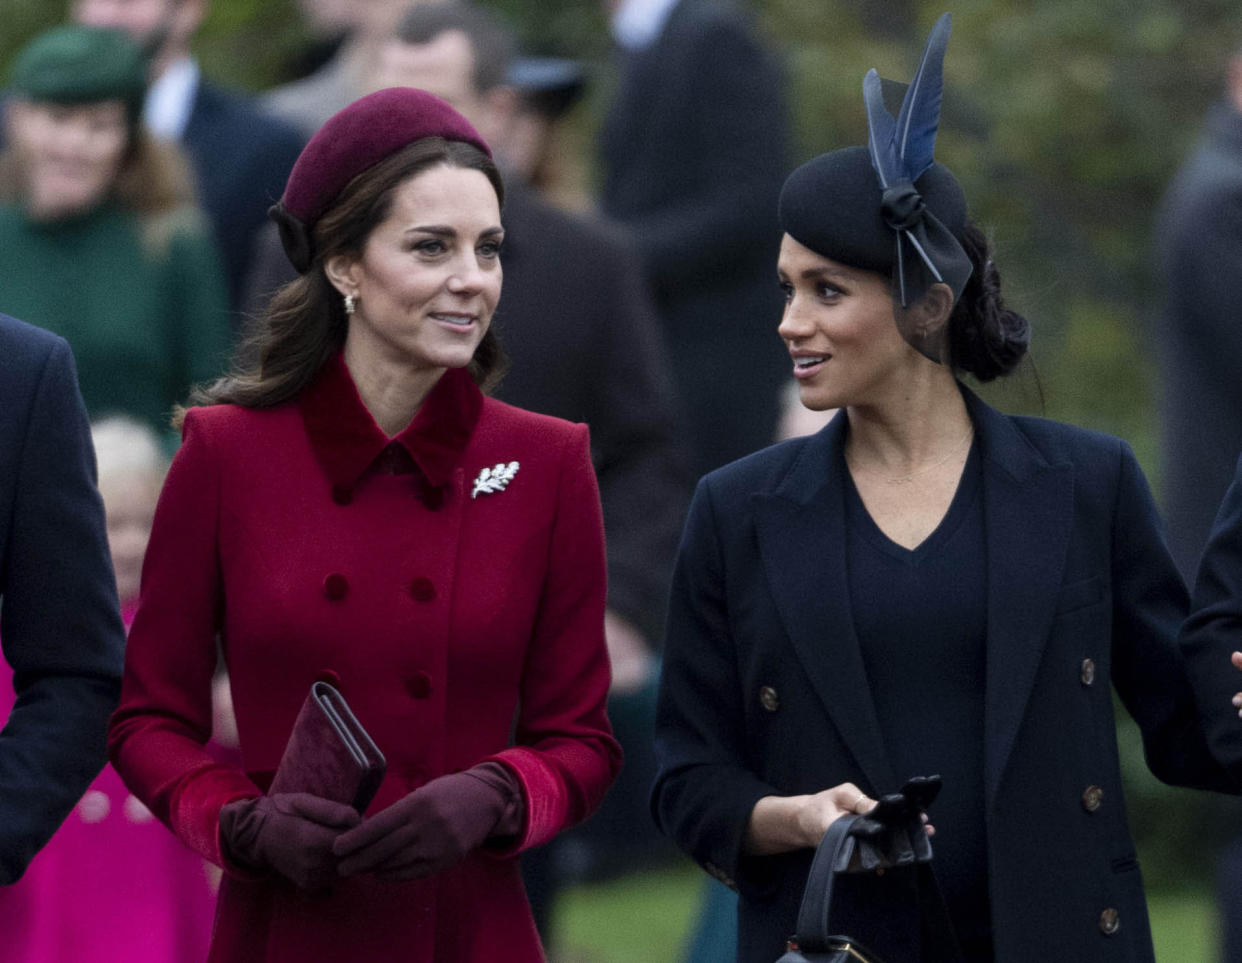 July 27th 2020 - Catherine The Duchess of Cambridge (Kate Middleton) and Meghan The Duchess of Sussex (Meghan Markle) allegedly never became friends and Meghan was upset that Kate never reached out to her nor visited according to the explosive new upcoming biography, 